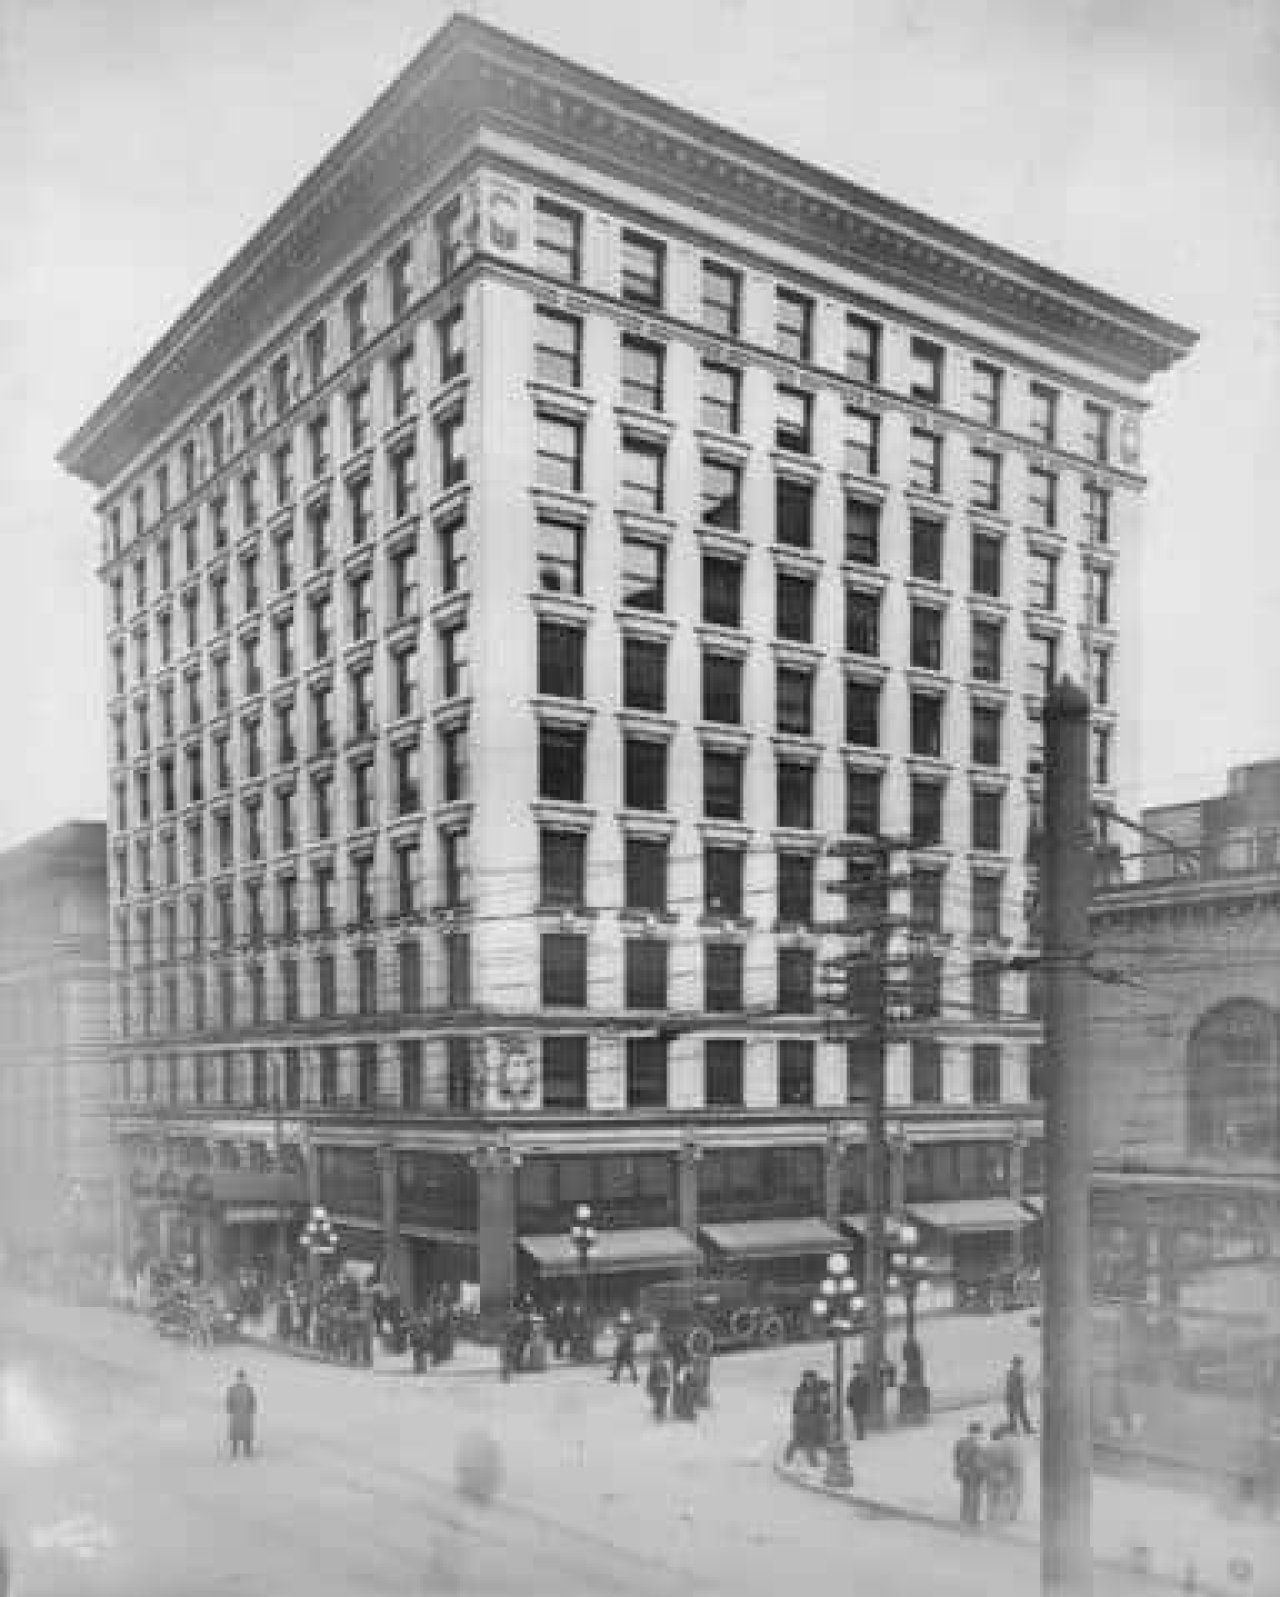 Rogers Building, c. 1911. Source: City of Vancouver Archives 1385-26